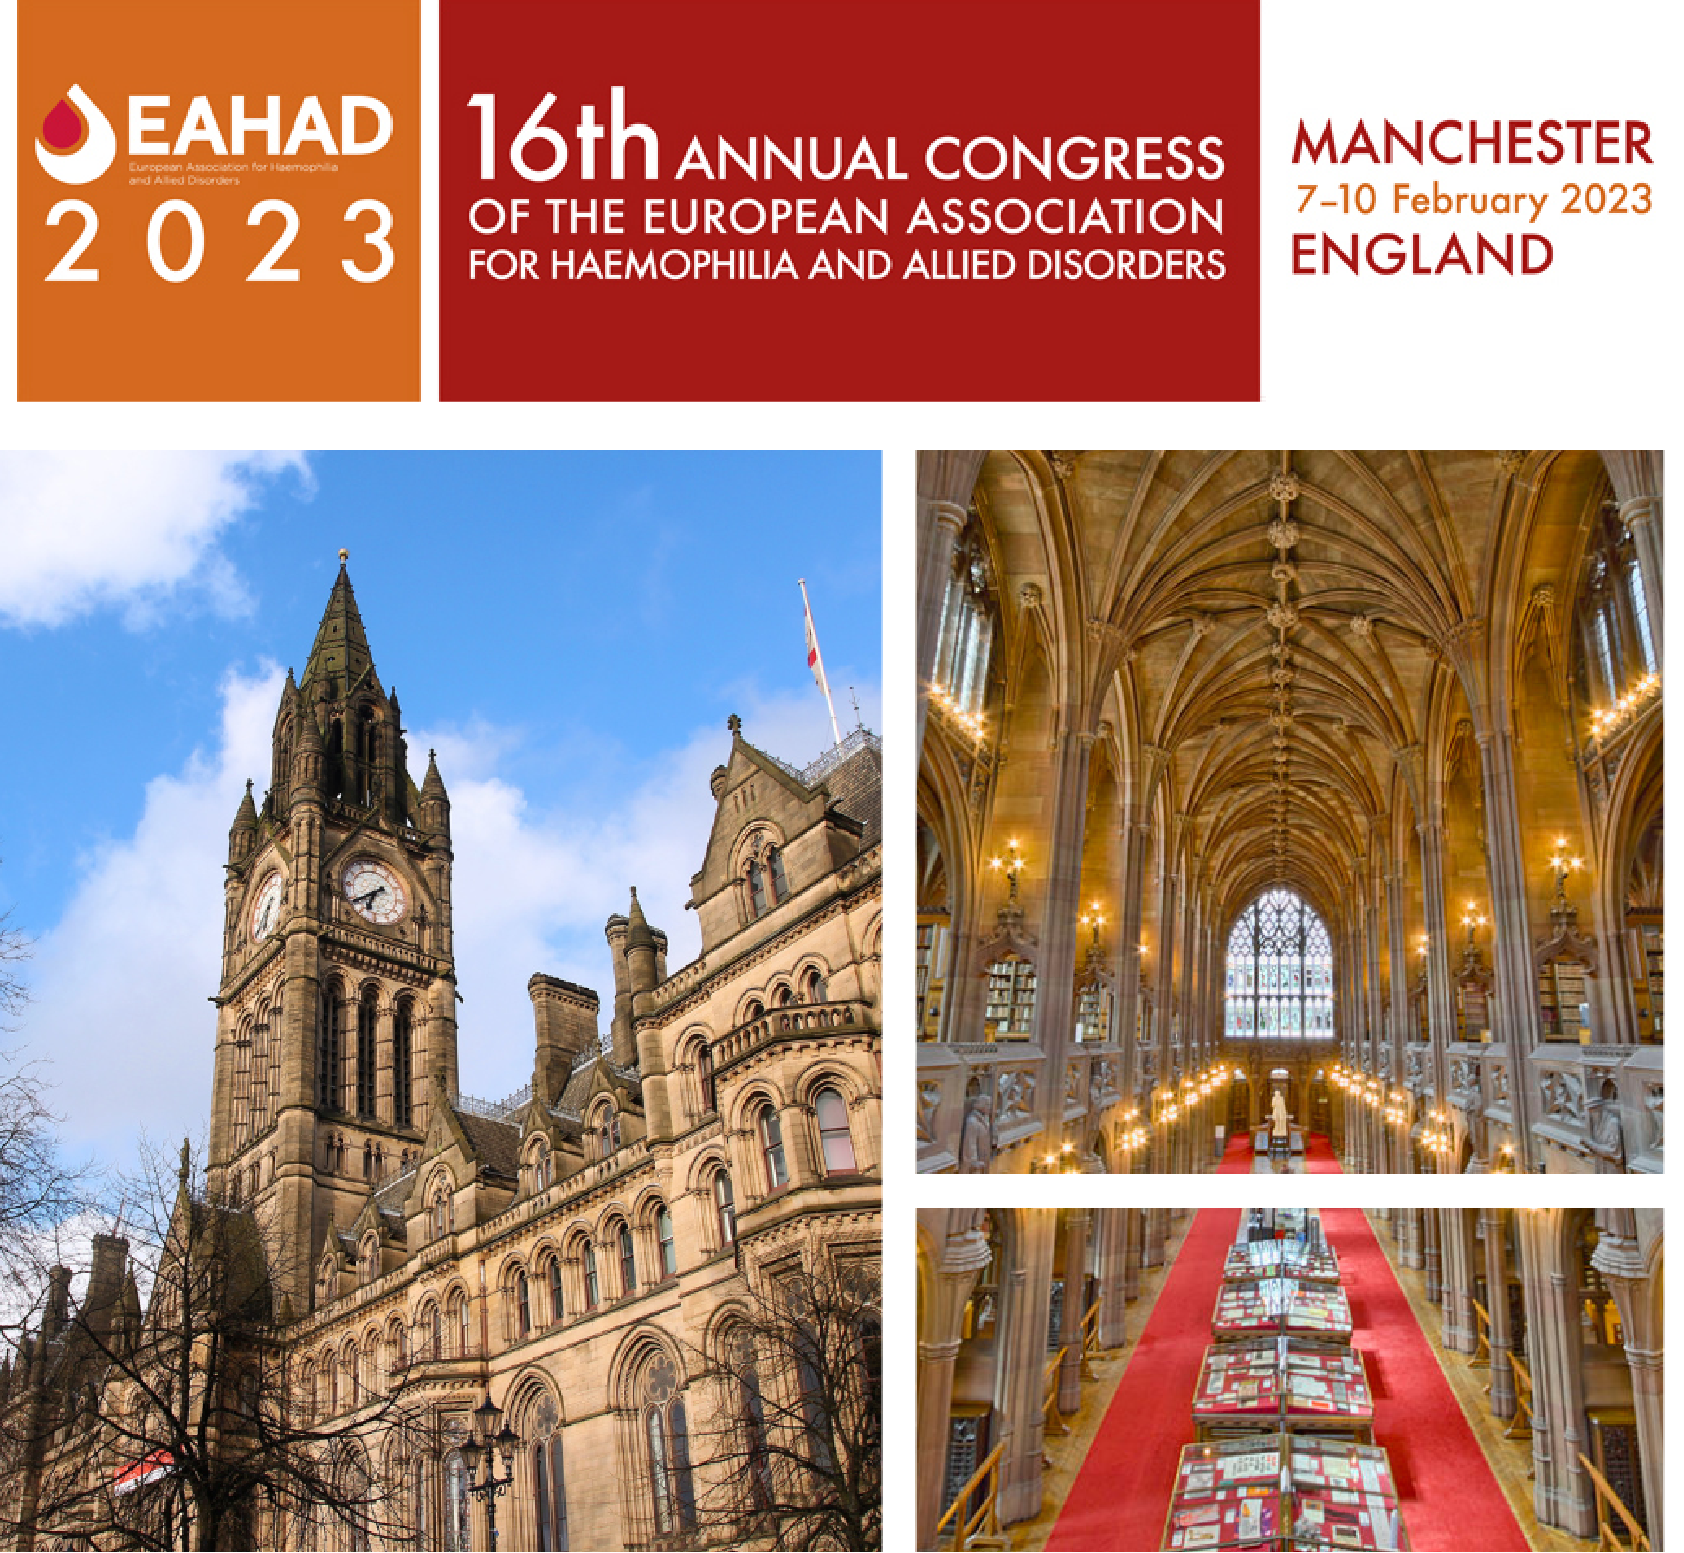 16th Annual Congress of the European Association for Haemophilia and Allied Disorders - EAHAD 2023